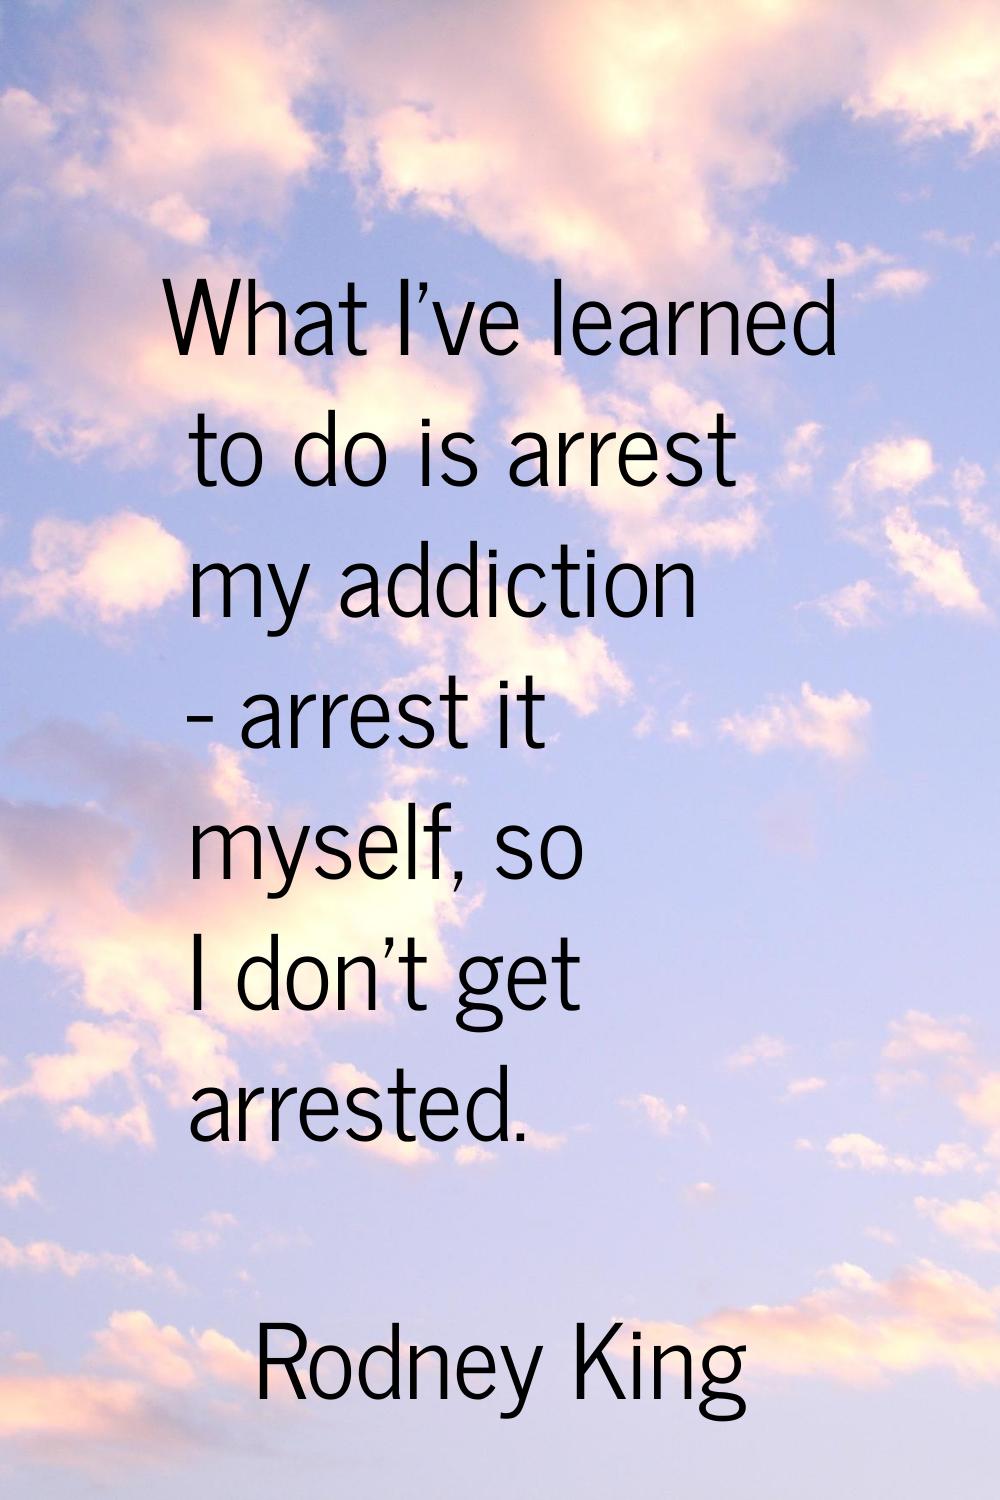 What I've learned to do is arrest my addiction - arrest it myself, so I don't get arrested.